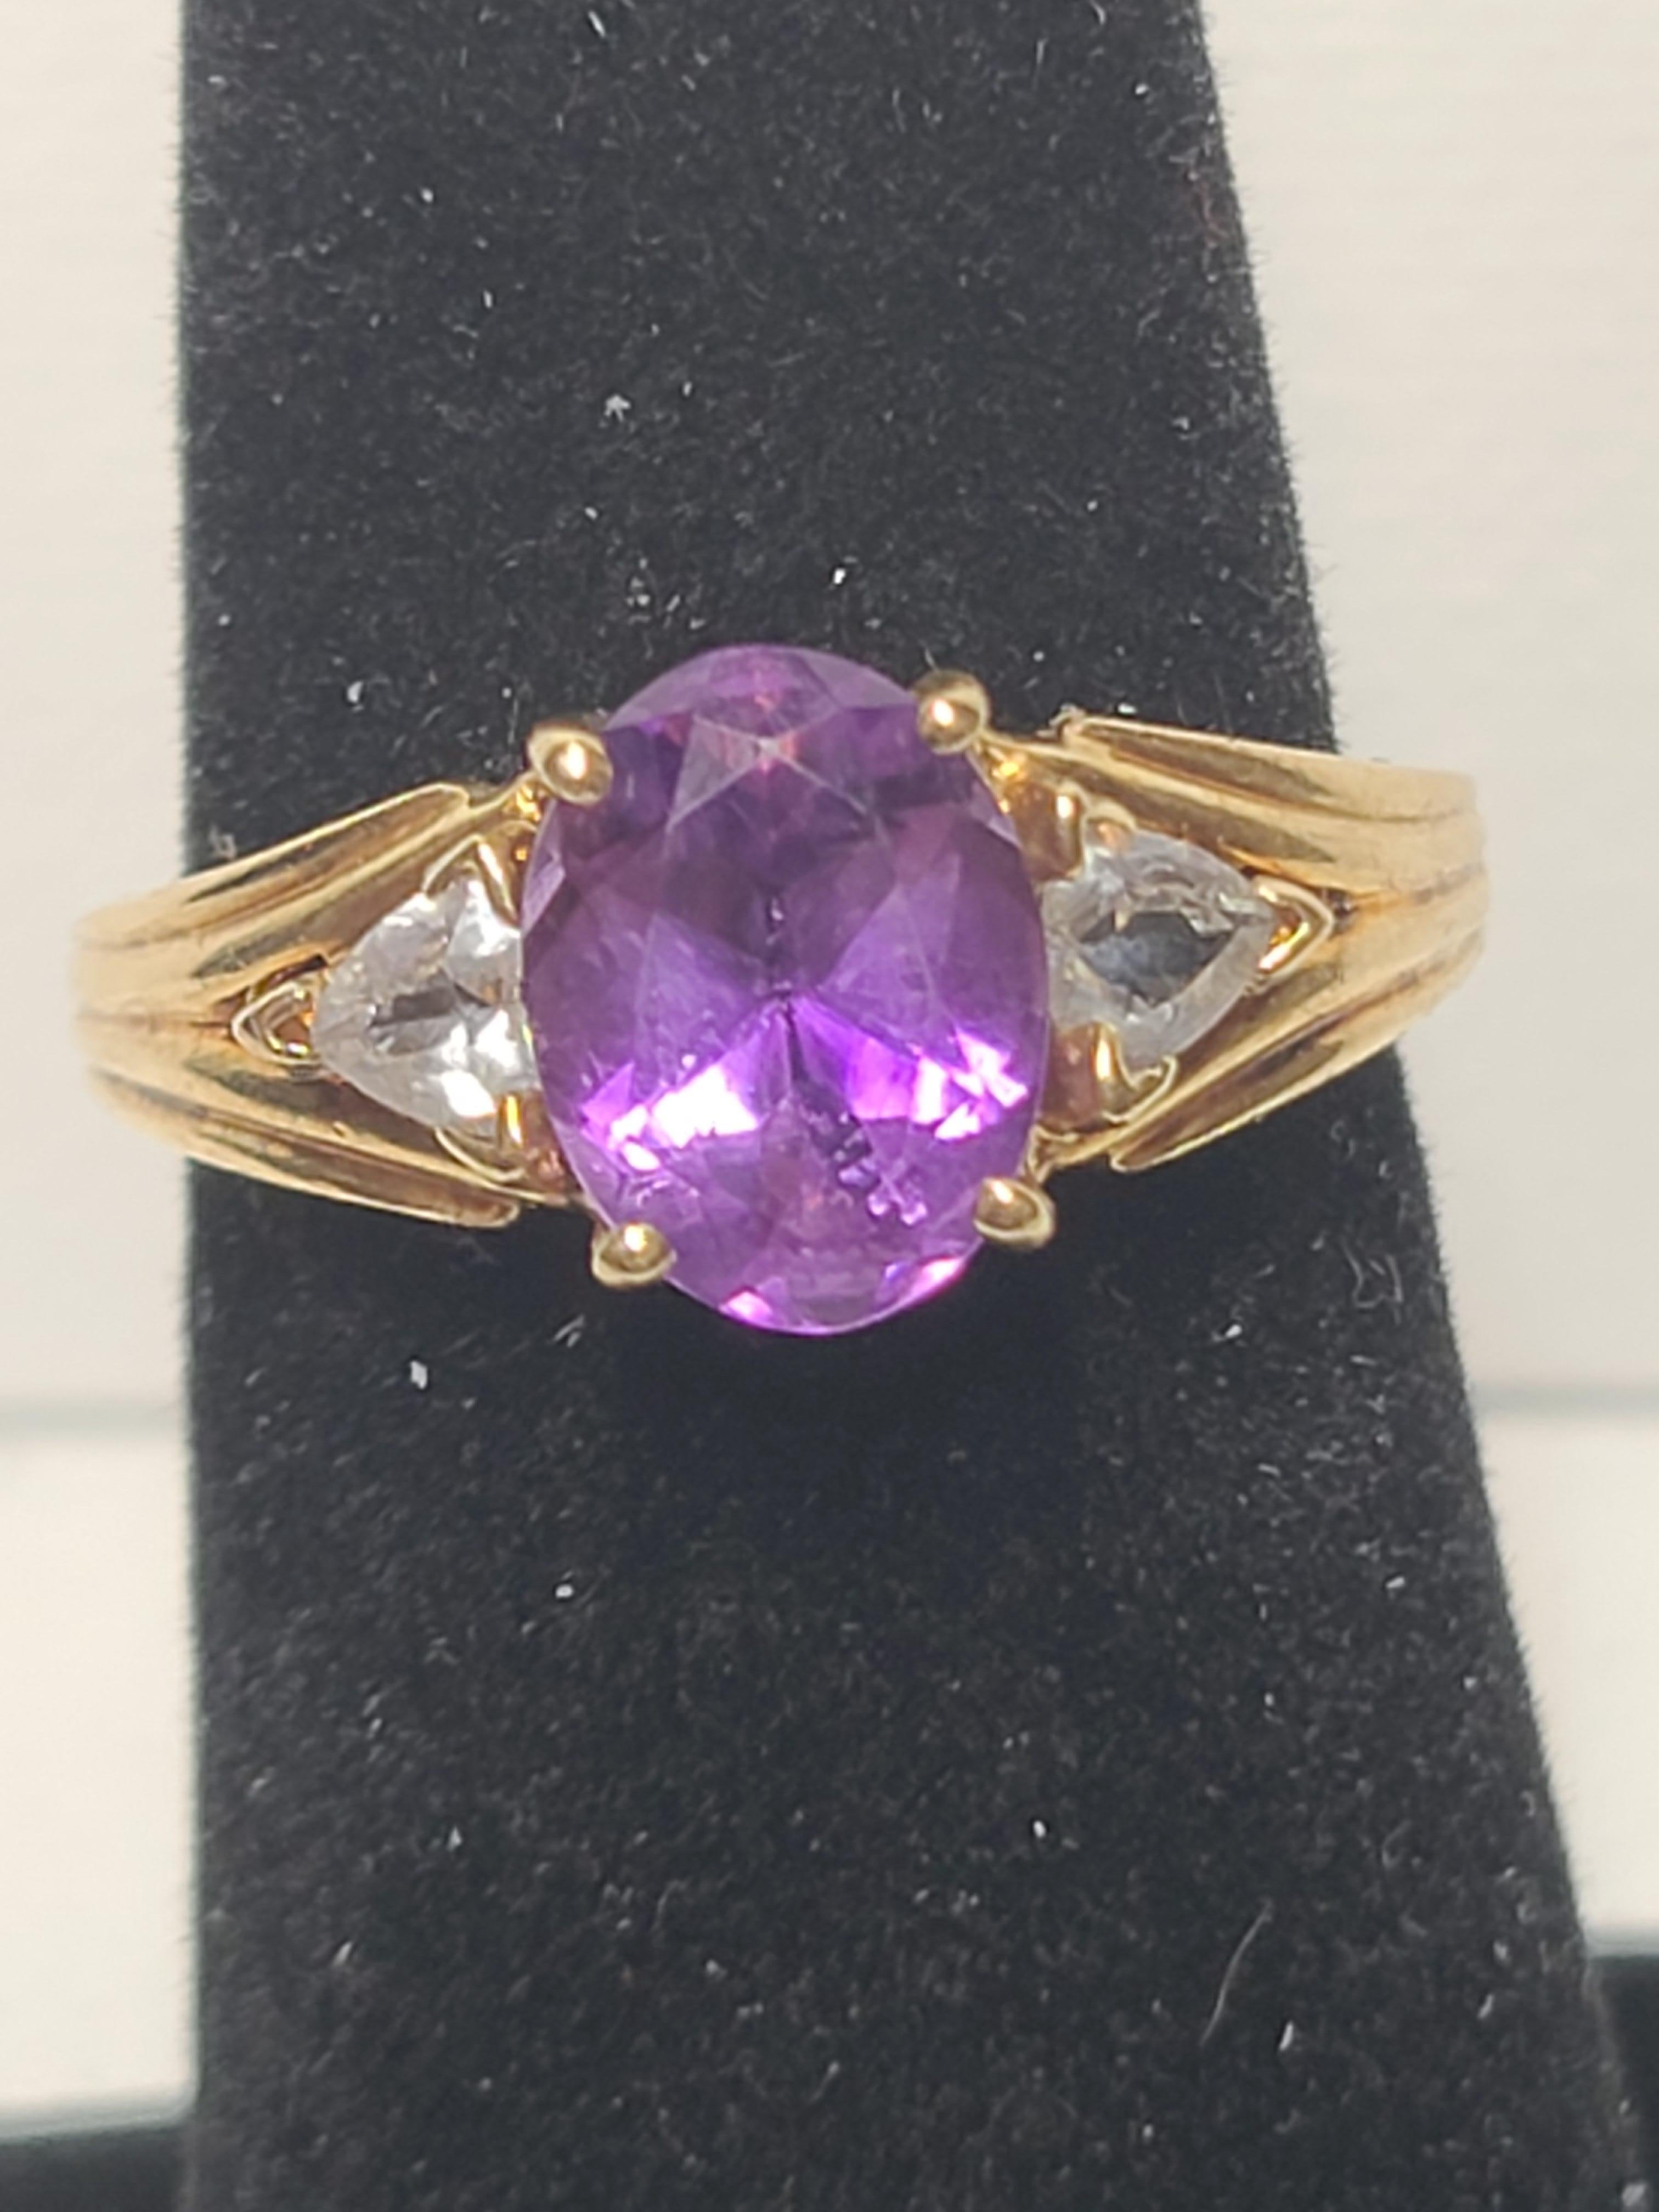 This estate found vintage 10K yellow gold ring features a 9x7mm natural amethyst for the main stone with should set trillion cut iolites.
Ring is size 7 (US)
Rings weighs 3.5 grams total
Ring is stamped 10K FL 